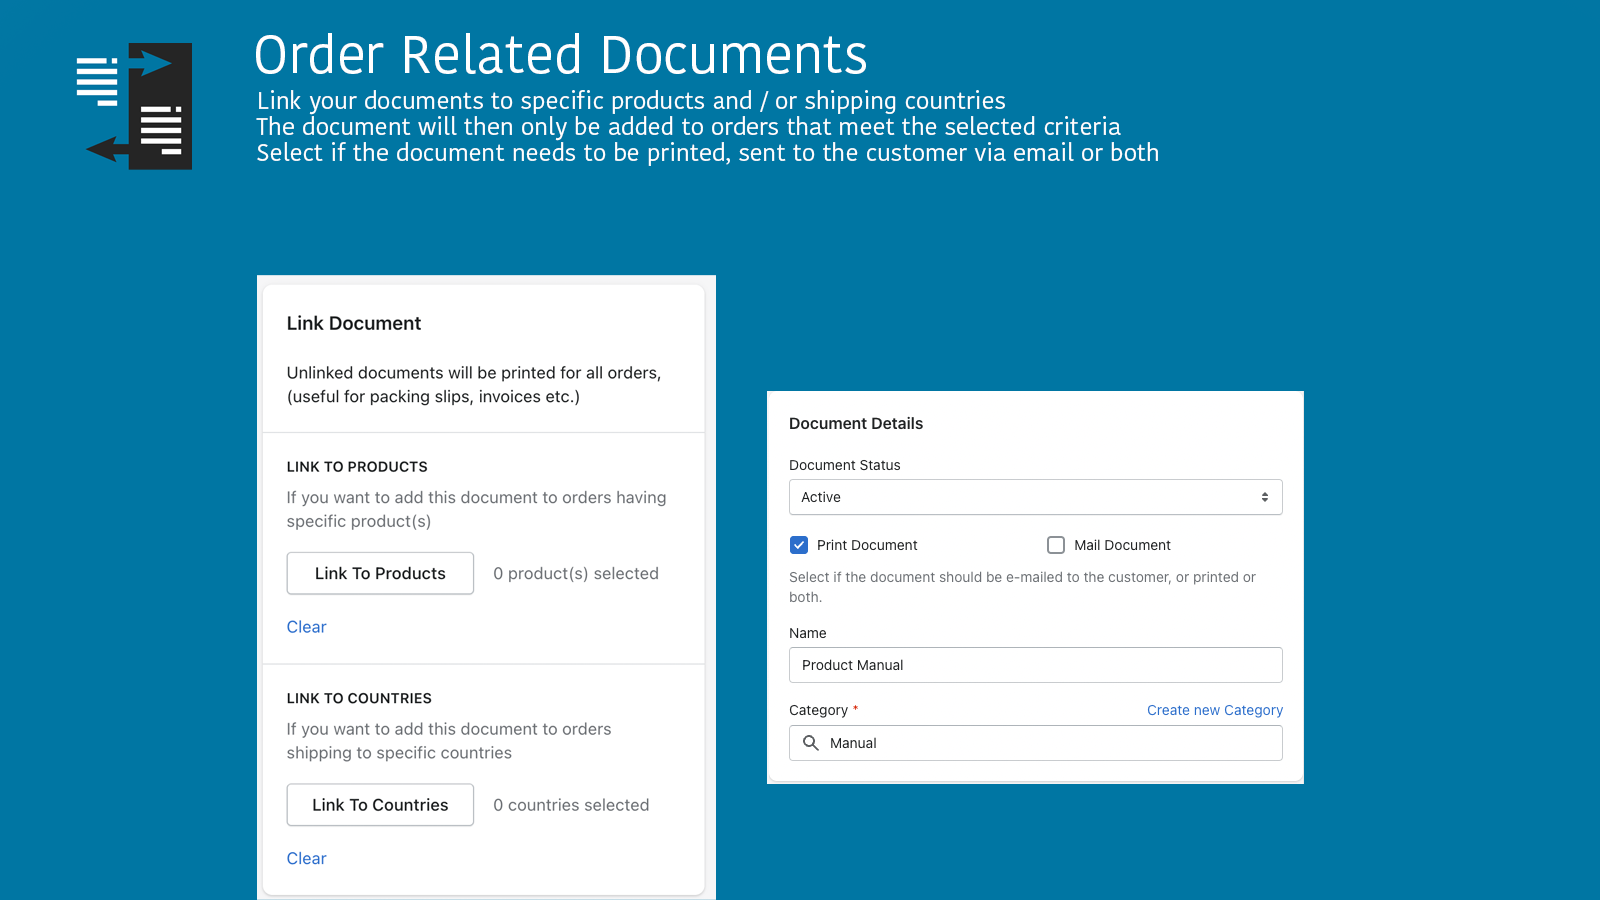 Link your document to specific products or shipping countries